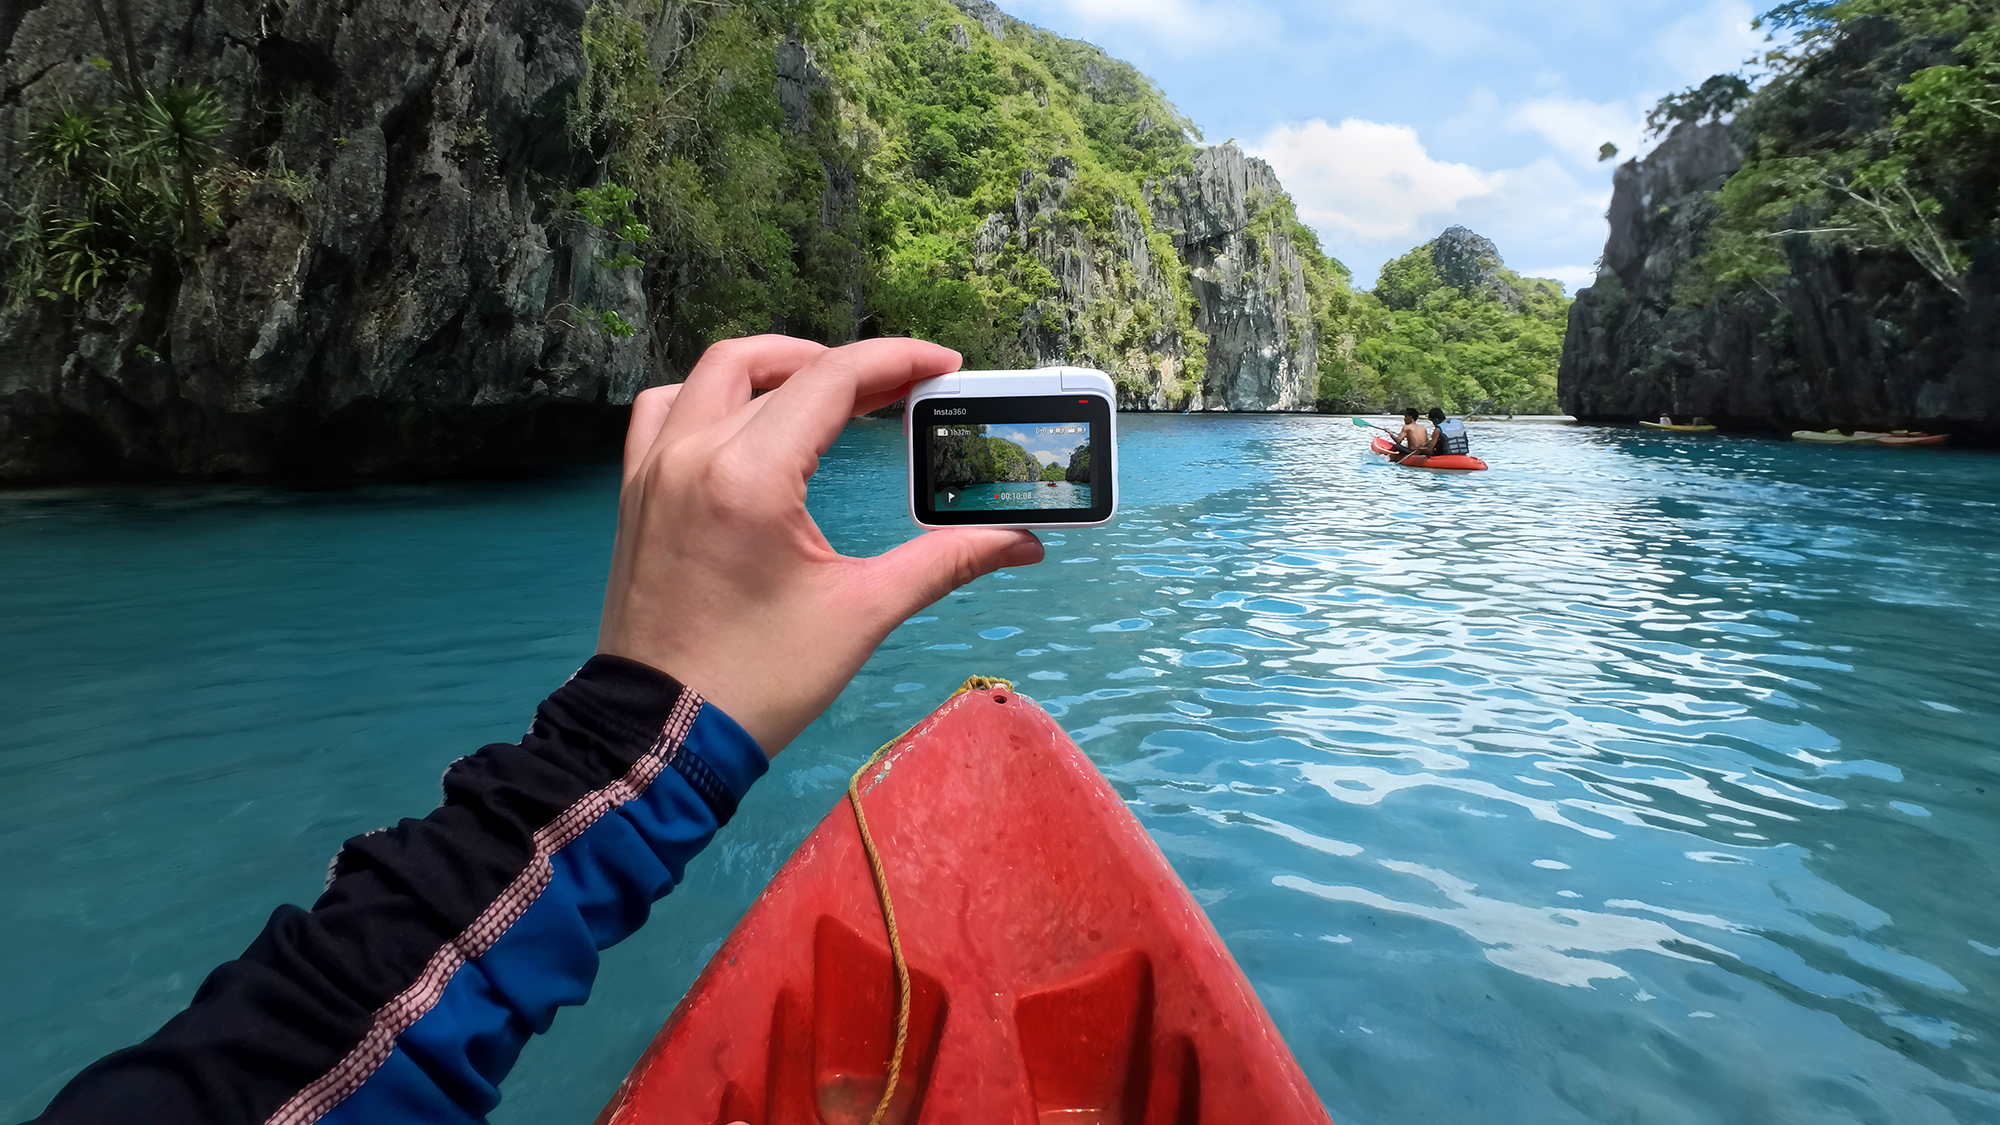 Insta360 Go 3 camera in the hand of a kayaker on a river